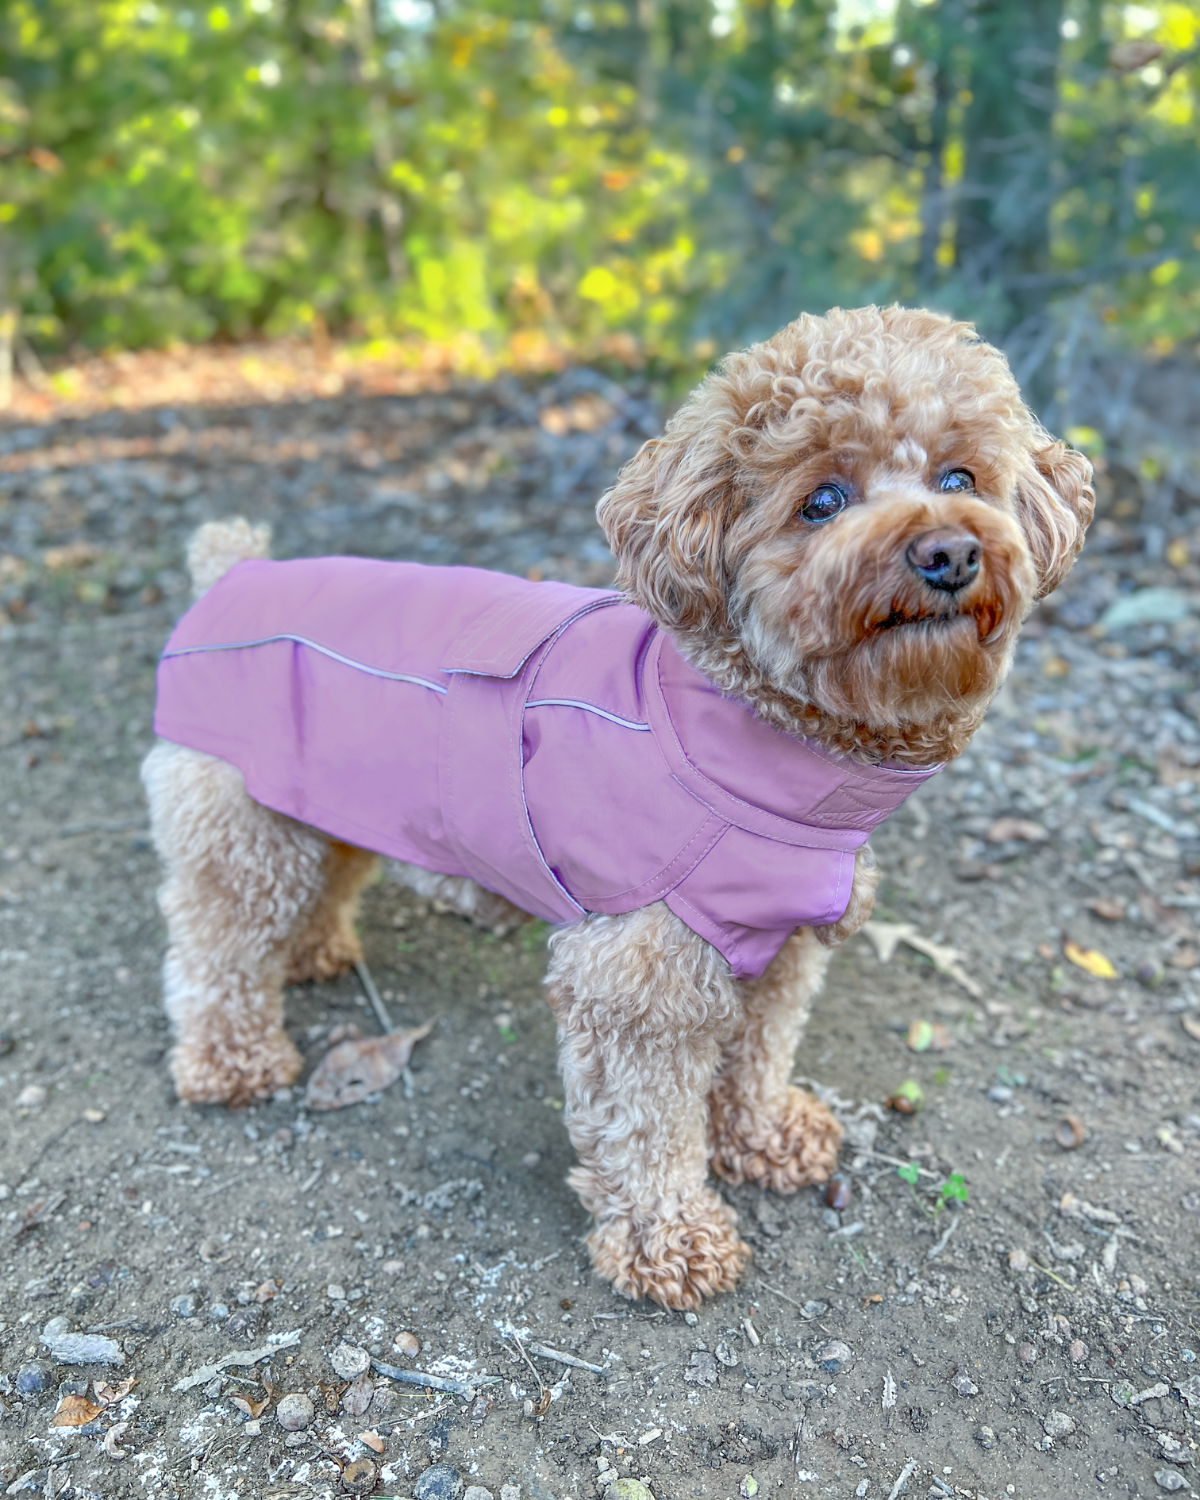 Dog Raincoat for Small Dogs Waterproof and Windproof pet Raincoat with  Adjustable Hood Small Dog Rain Jacket with Safety Reflective Piping for  Small